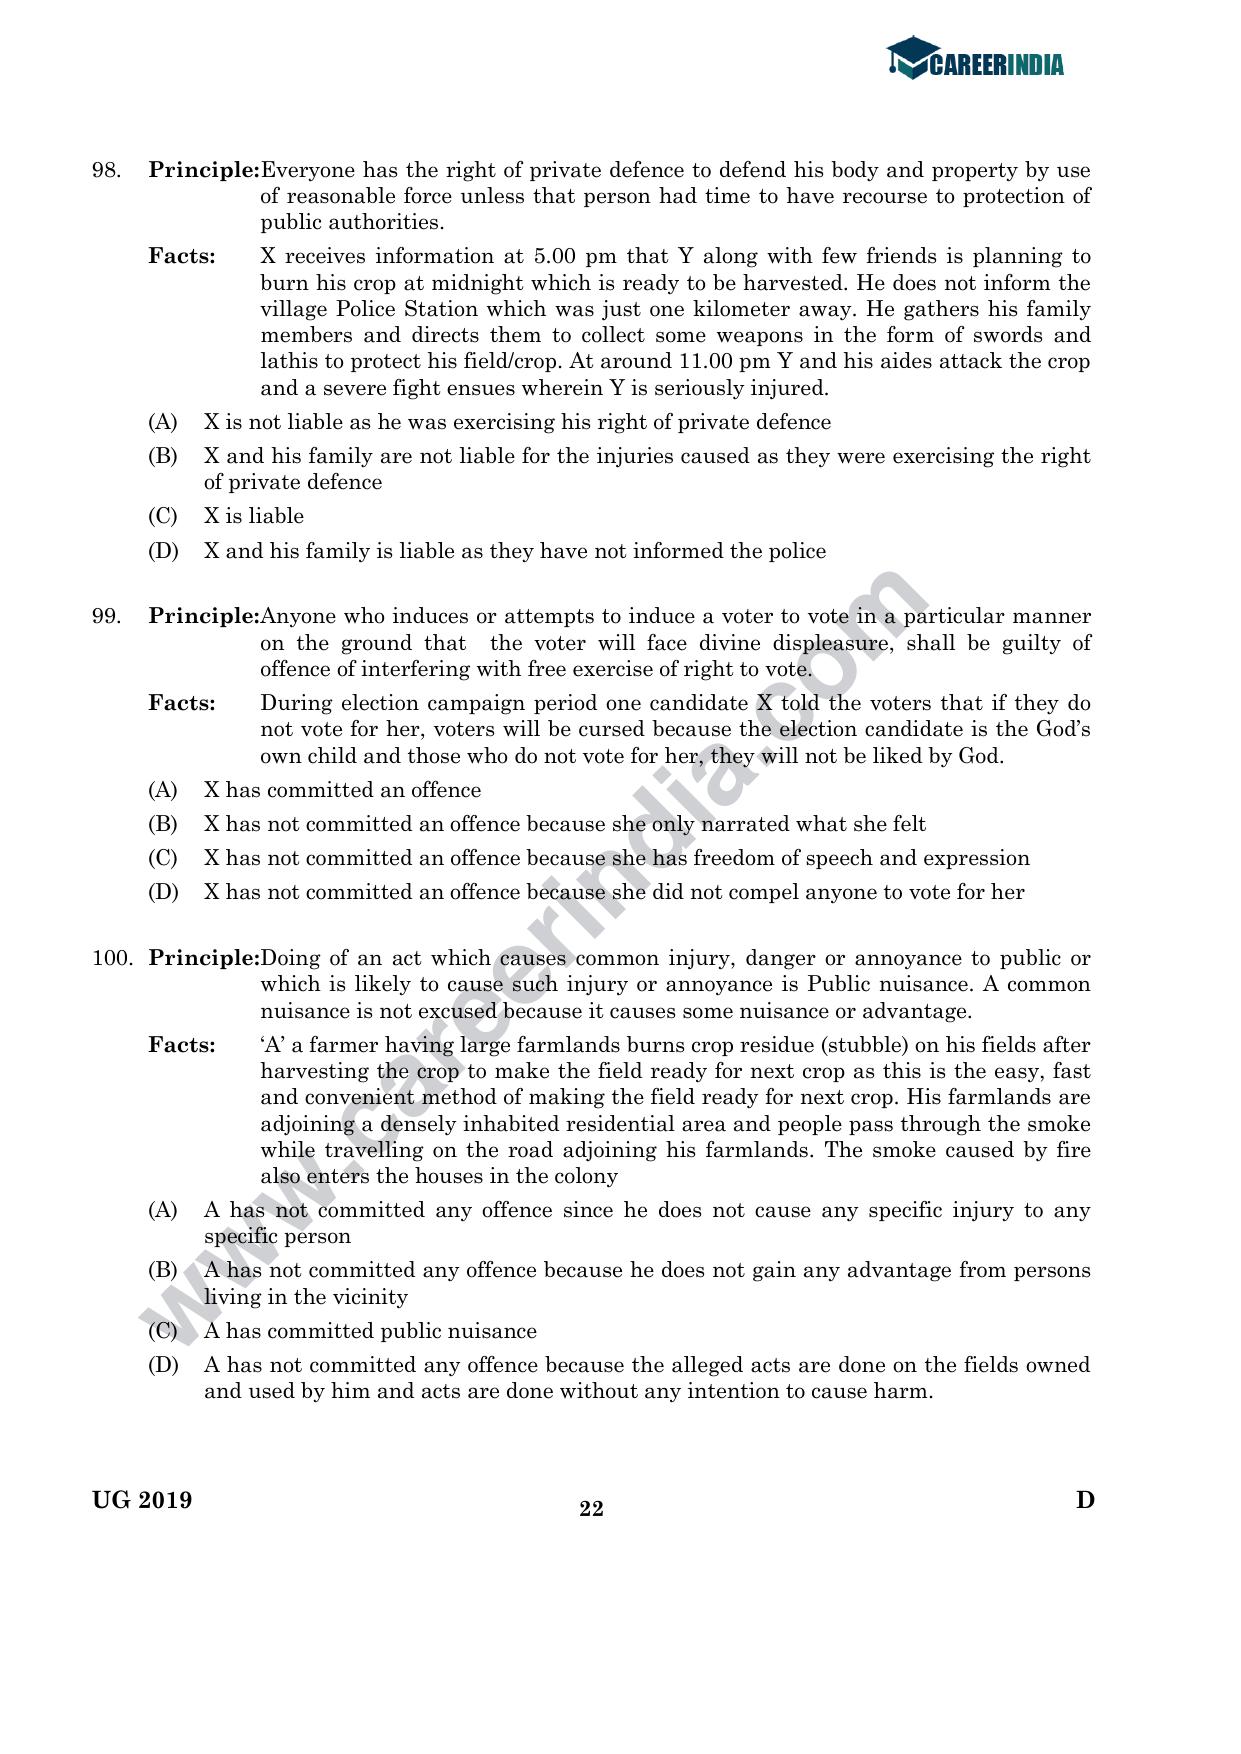 CLAT 2019 UG Logical-Reasoning Question Paper - Page 21